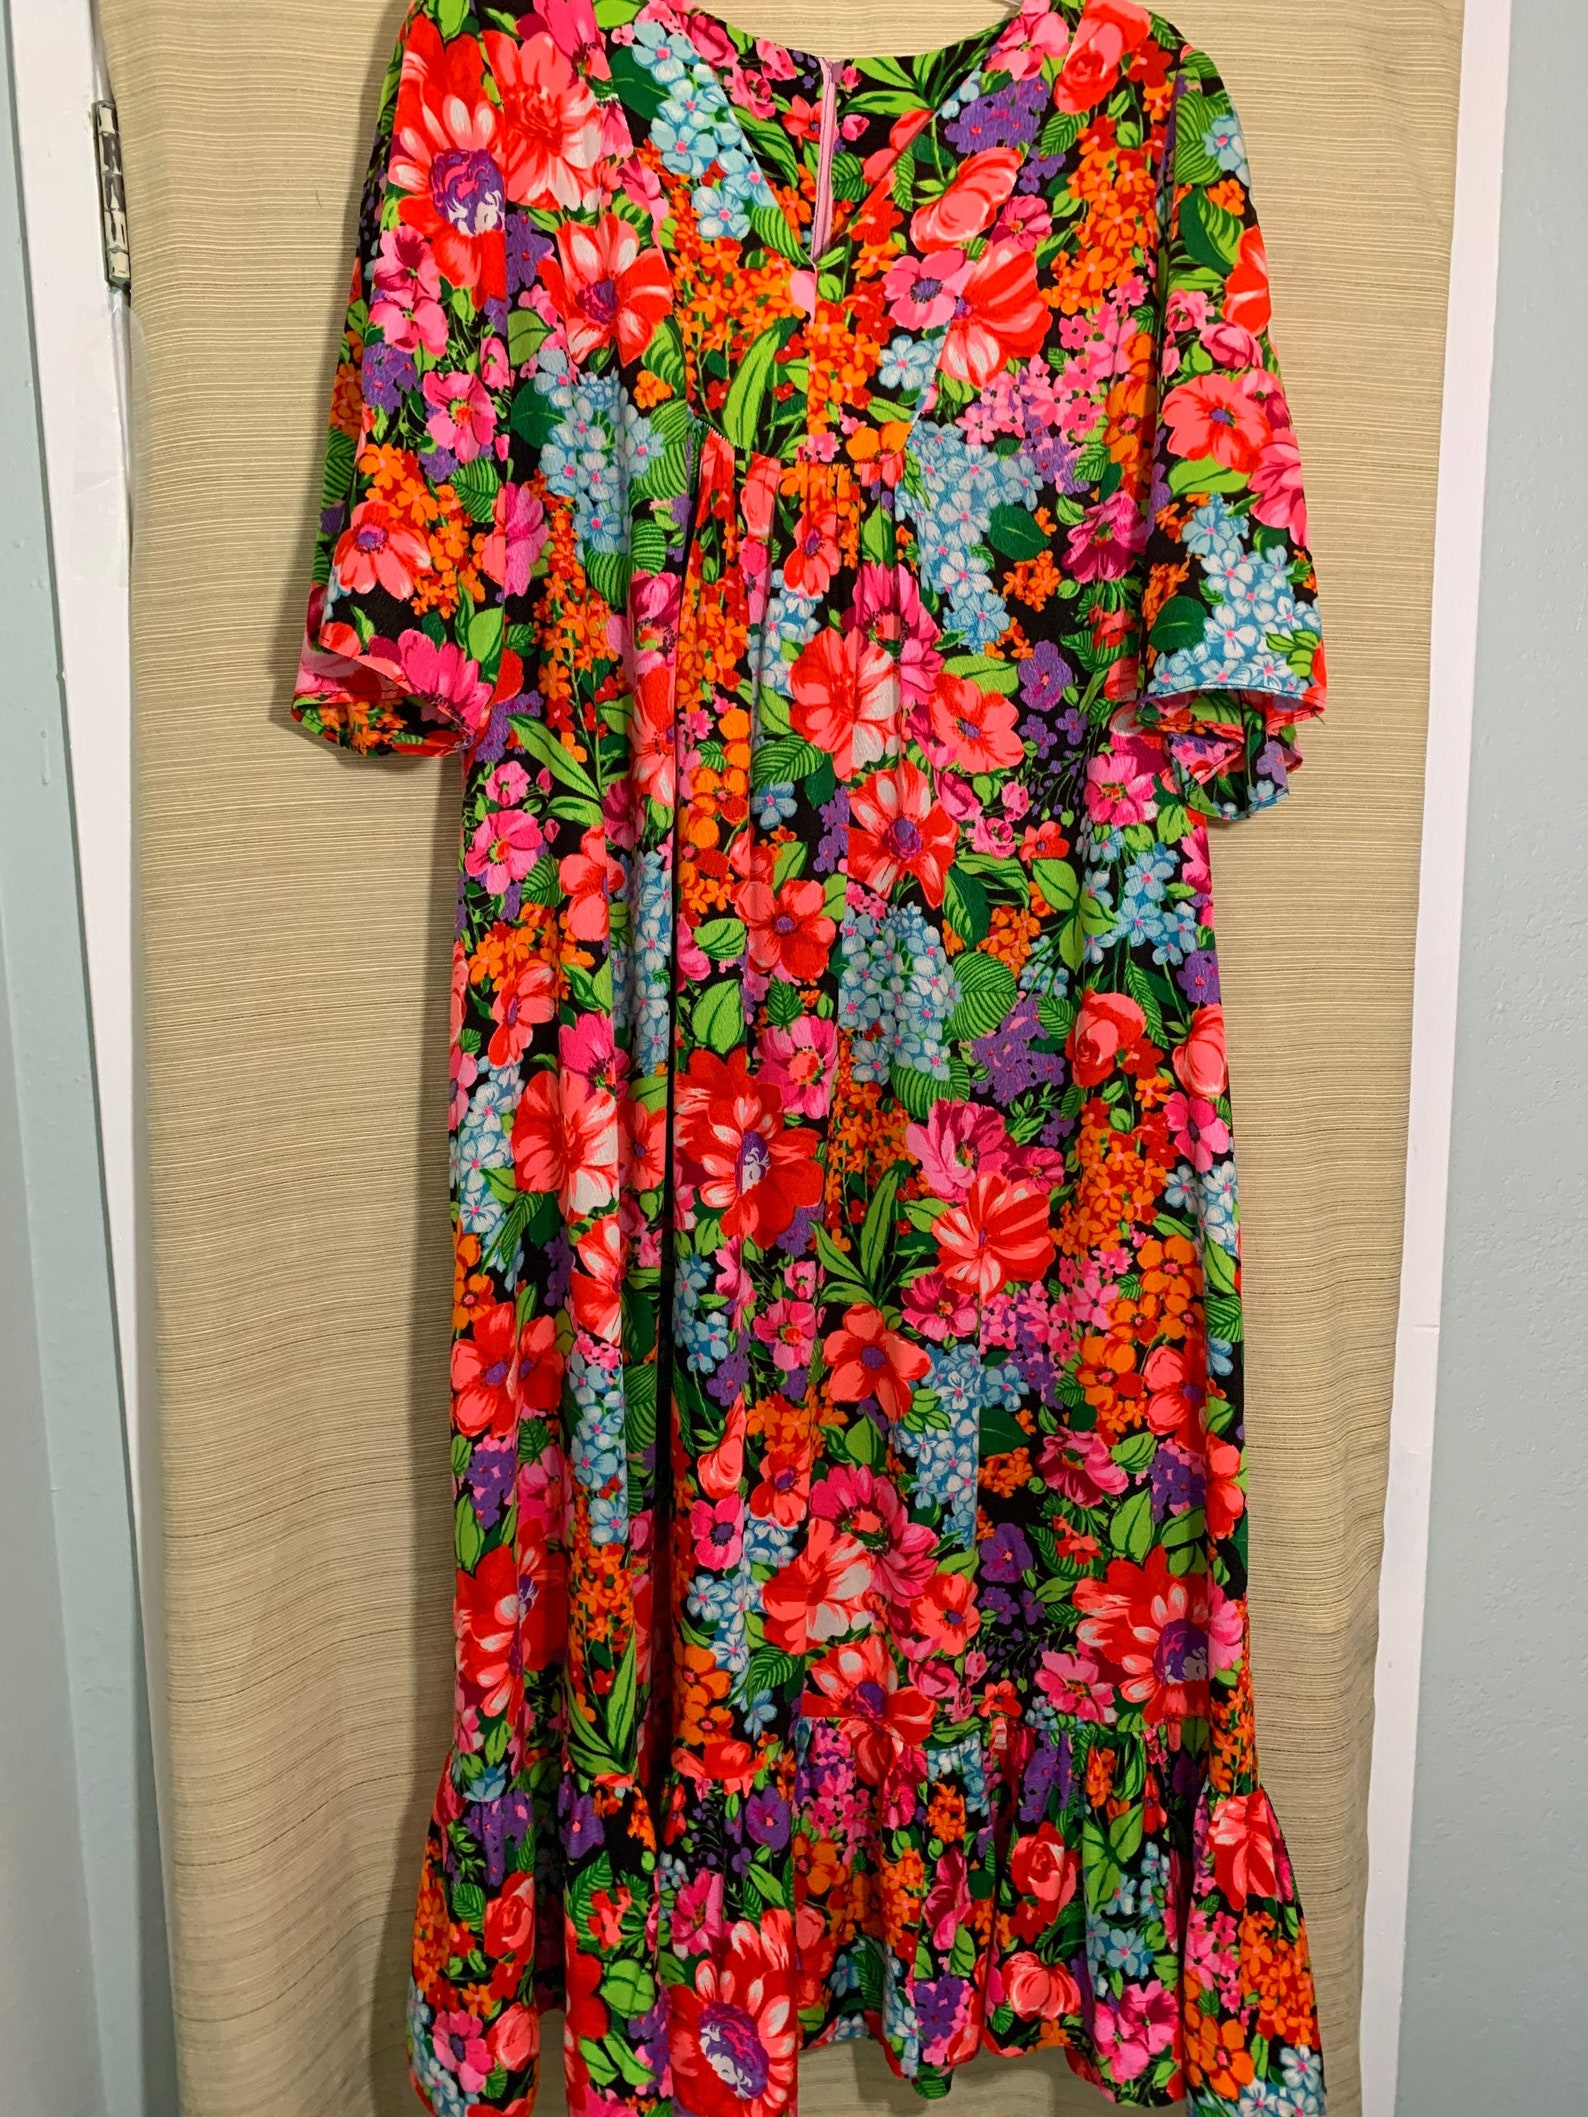 Vibrant and colorful muumuu covered with a beautiful garden of | Etsy